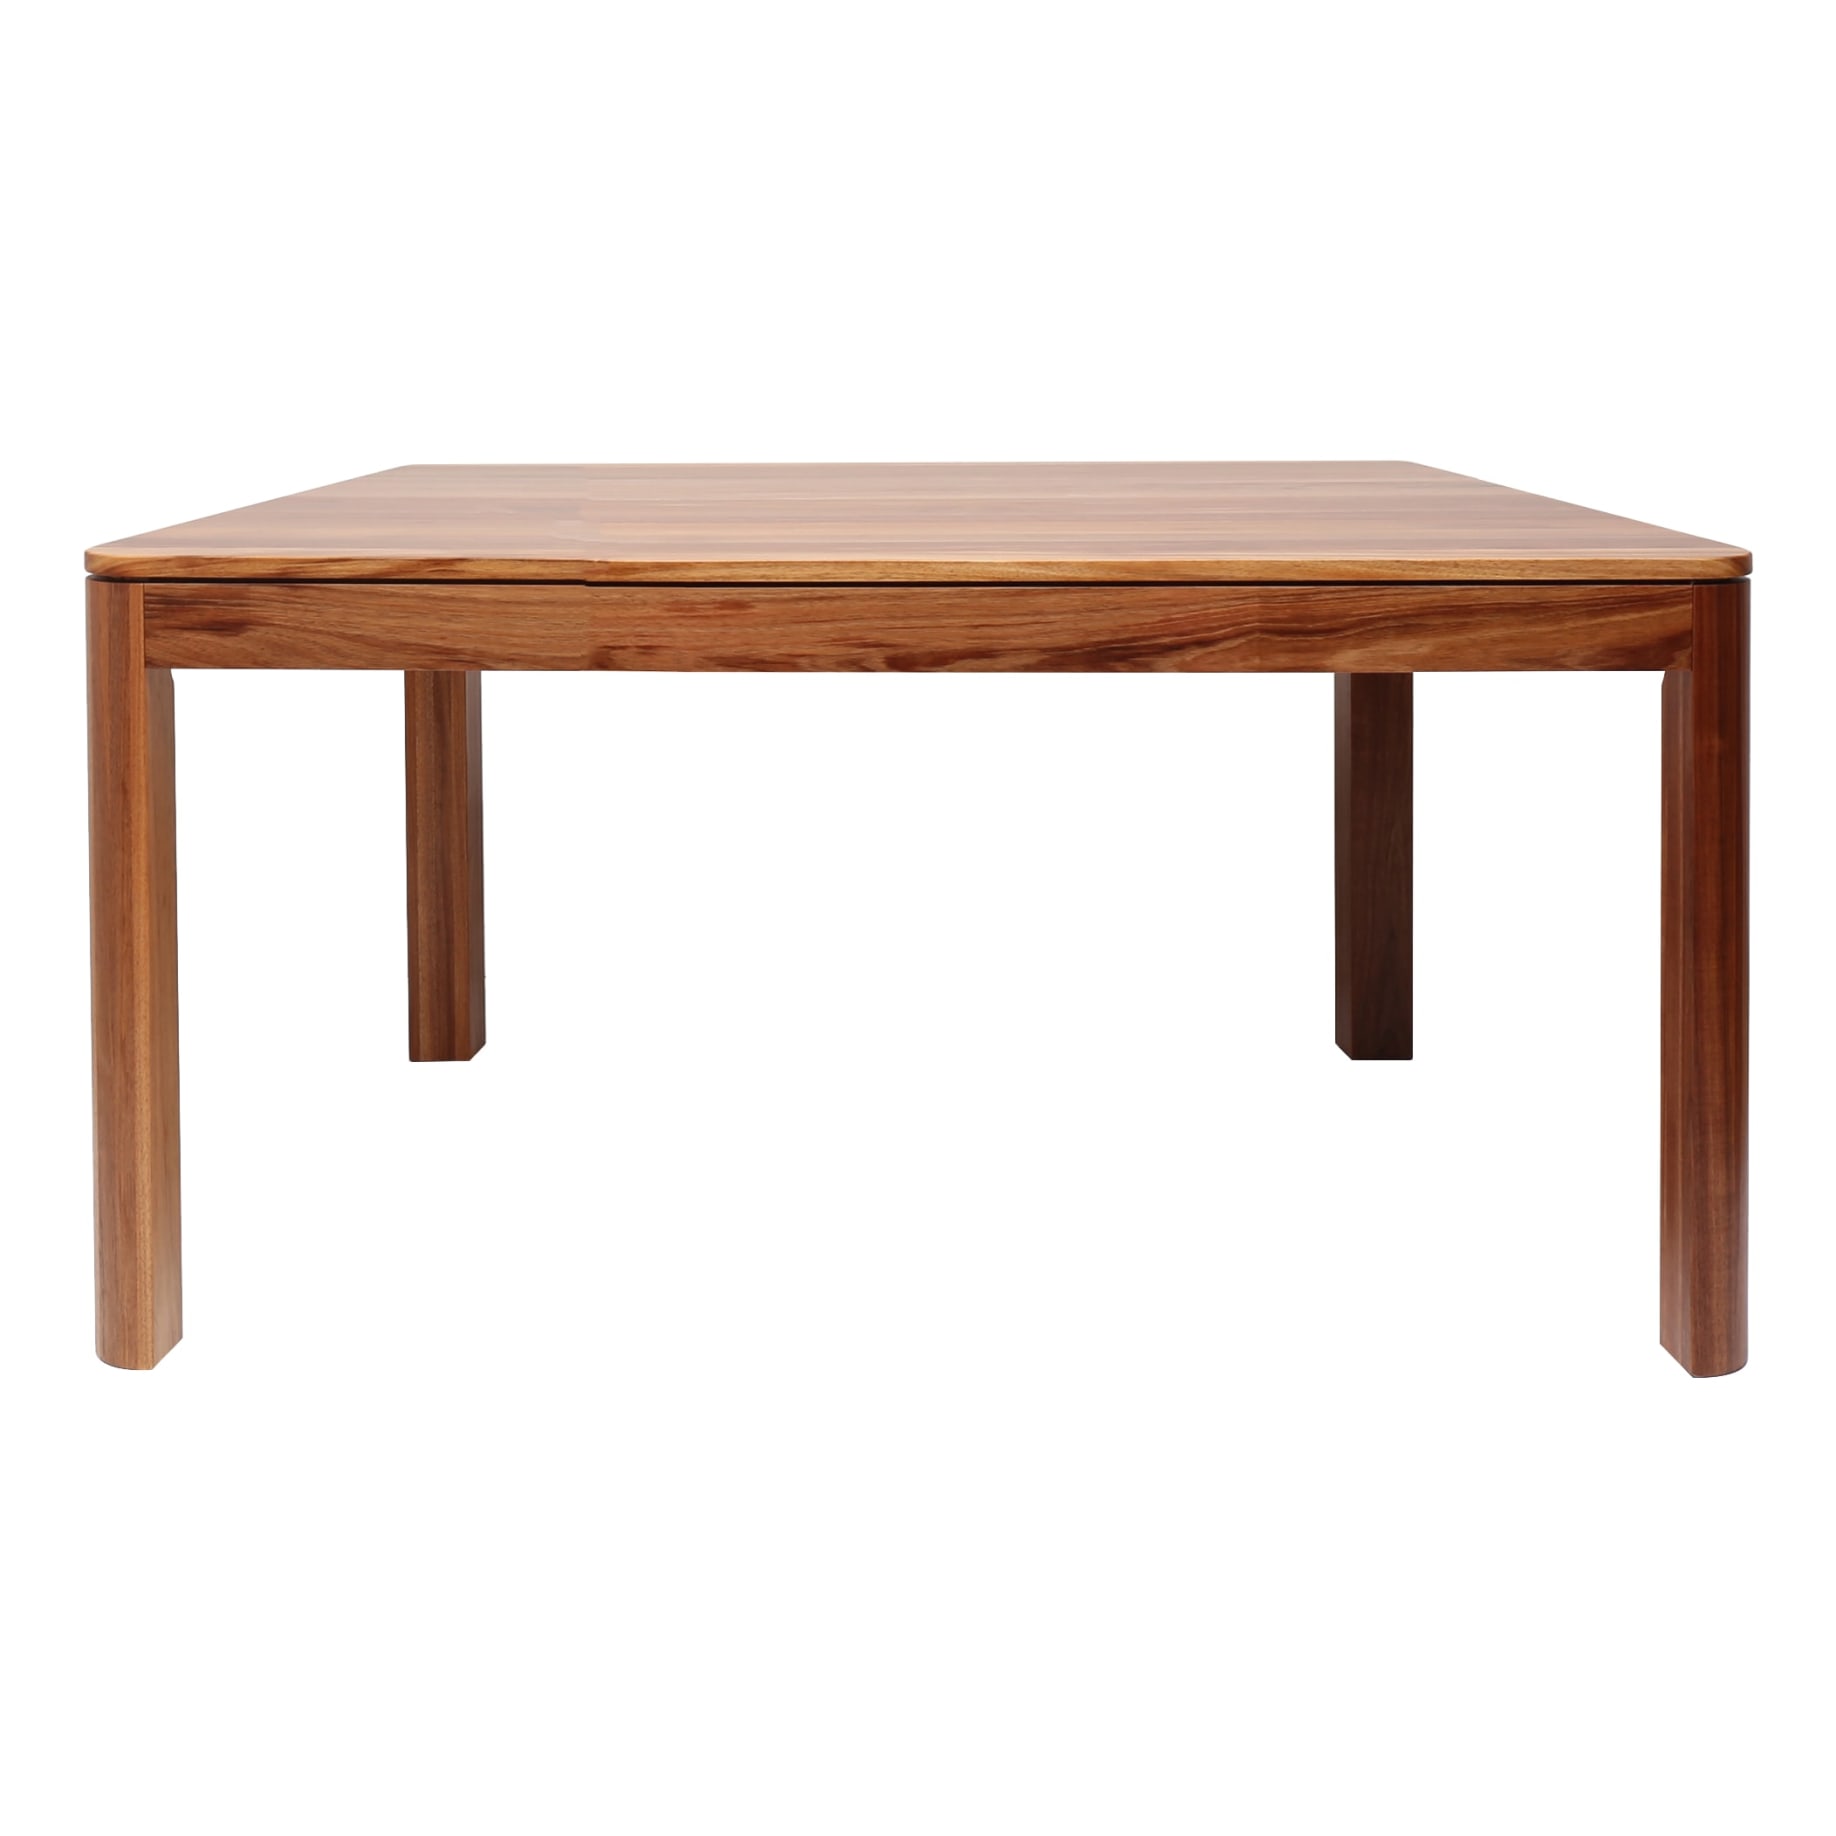 Bronte Dining Table 150cm in Australian Timbers